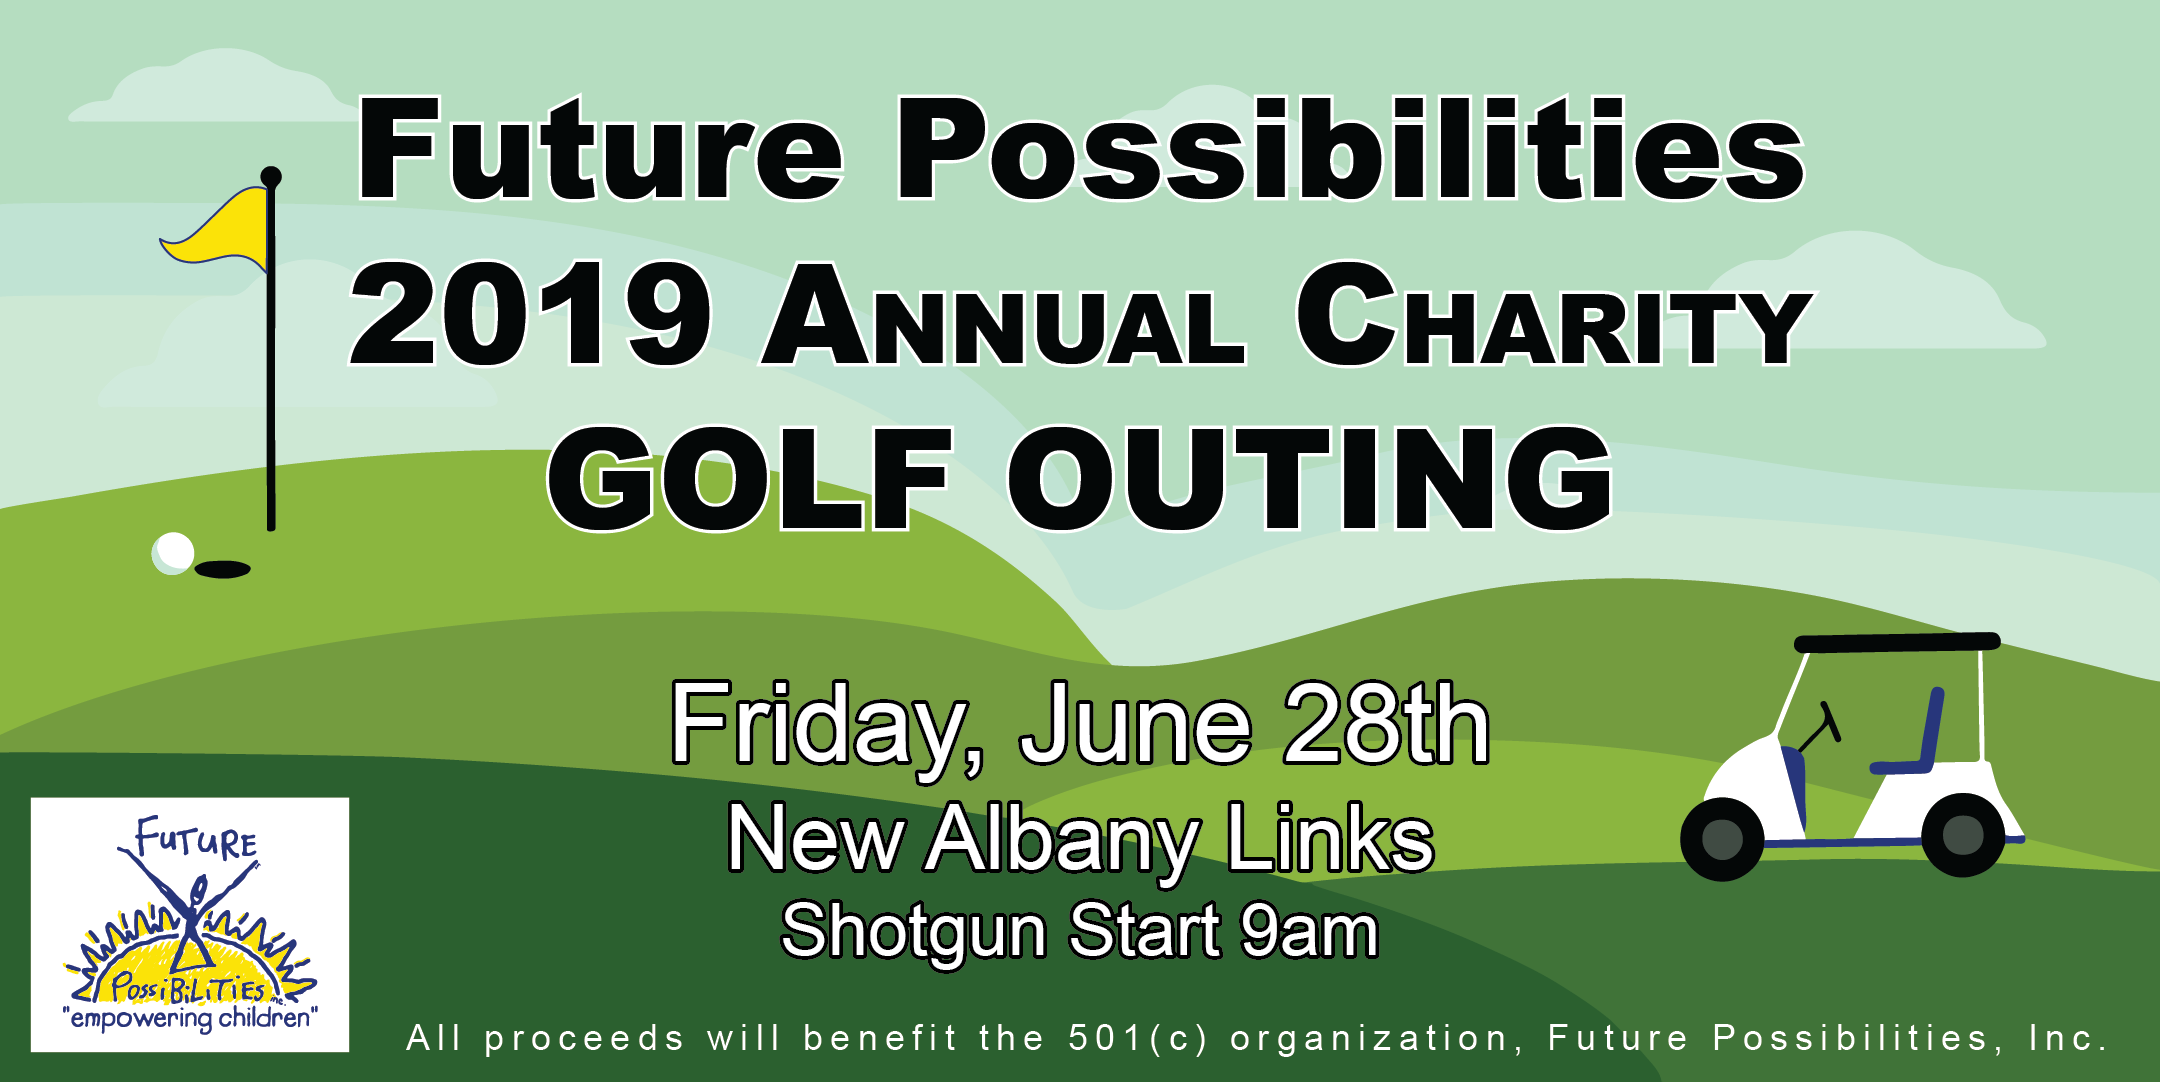 FP 2019 Golf Outing